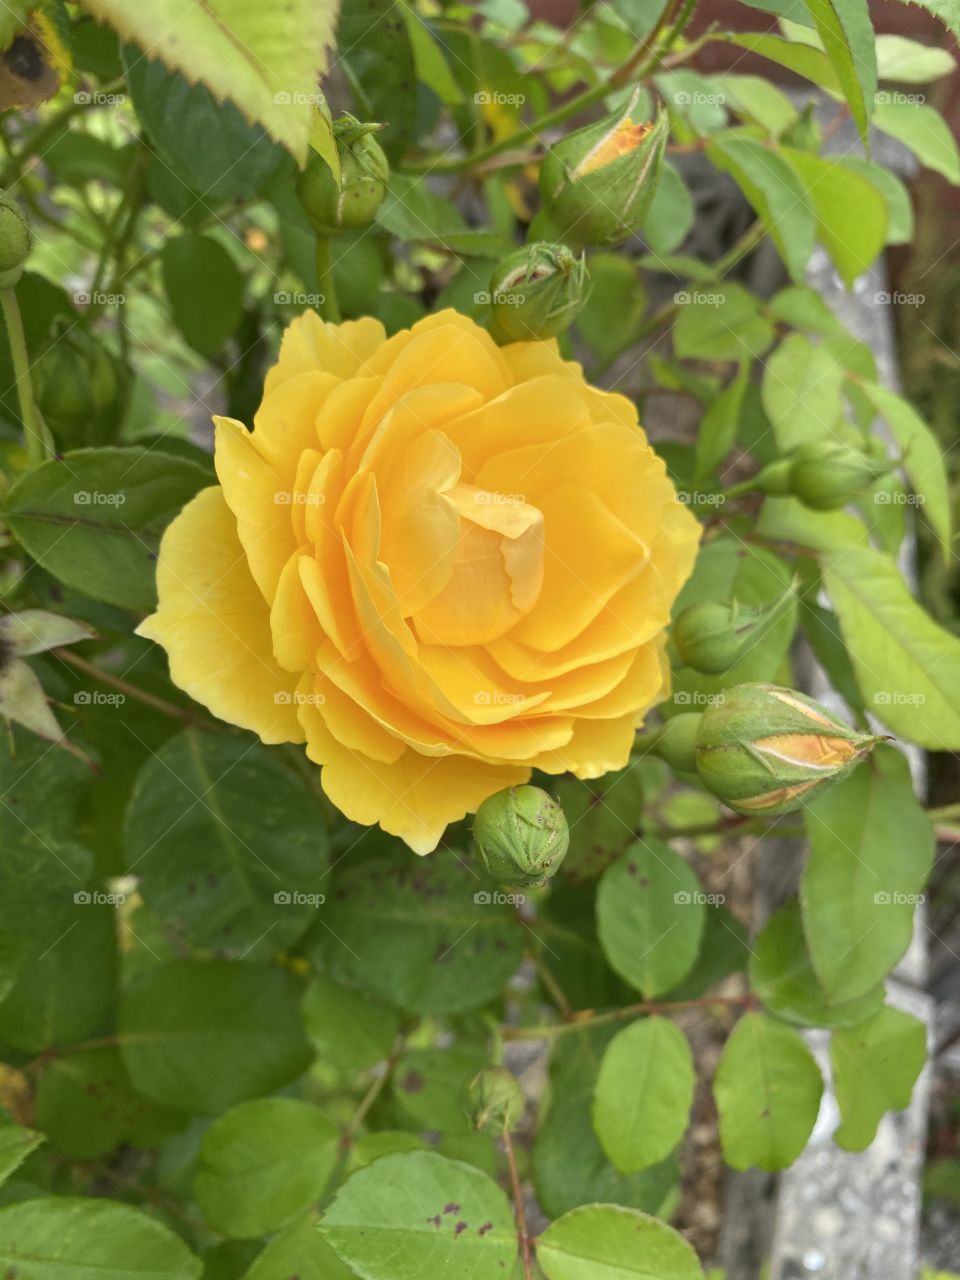 Sumptuous yellow garden rose, the second wave of this beautiful rose, for Summer 2020